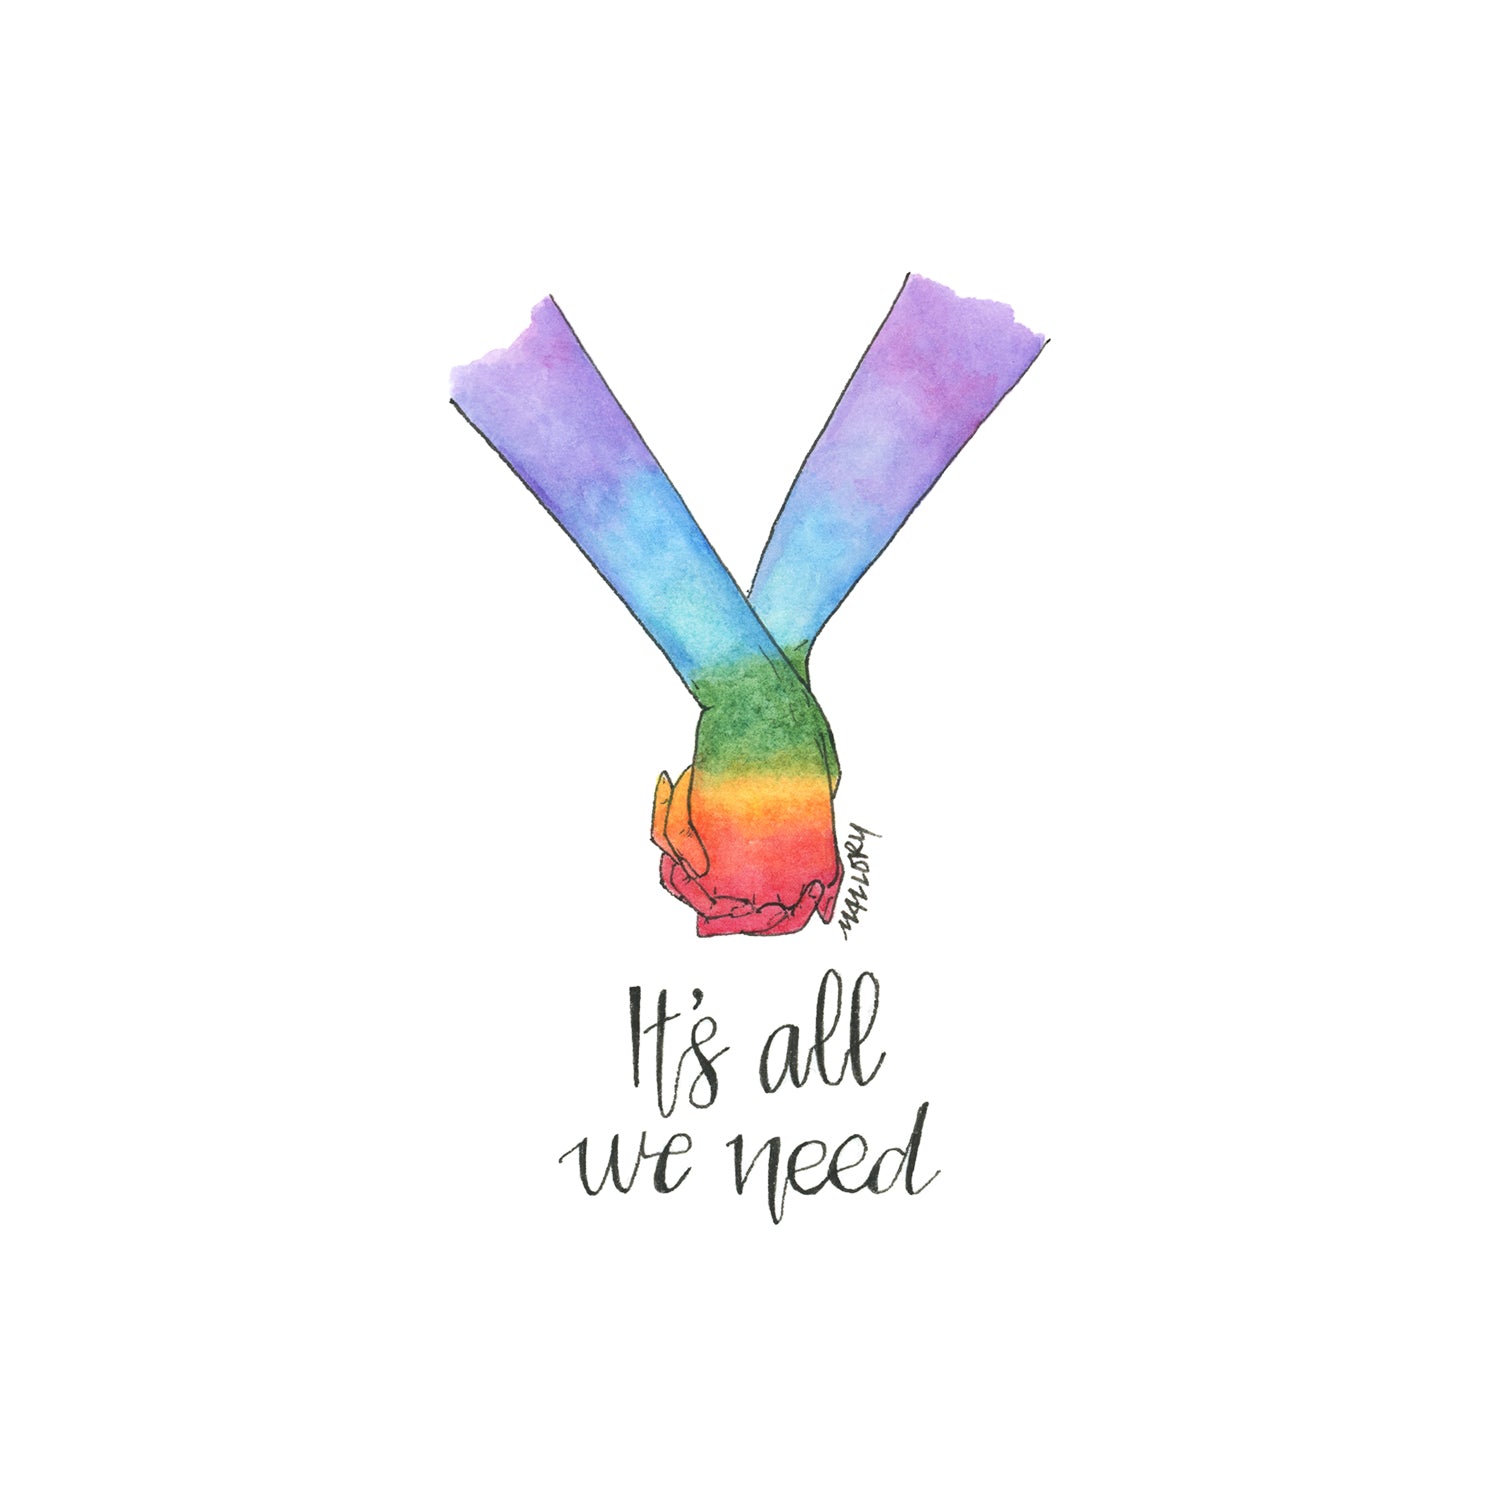 Image of a pride card to show support for LGBTQ+. Hand-drawn card shows two holding hands that are painted with the pride rainbow with the words, "It's all we need" lettered below.